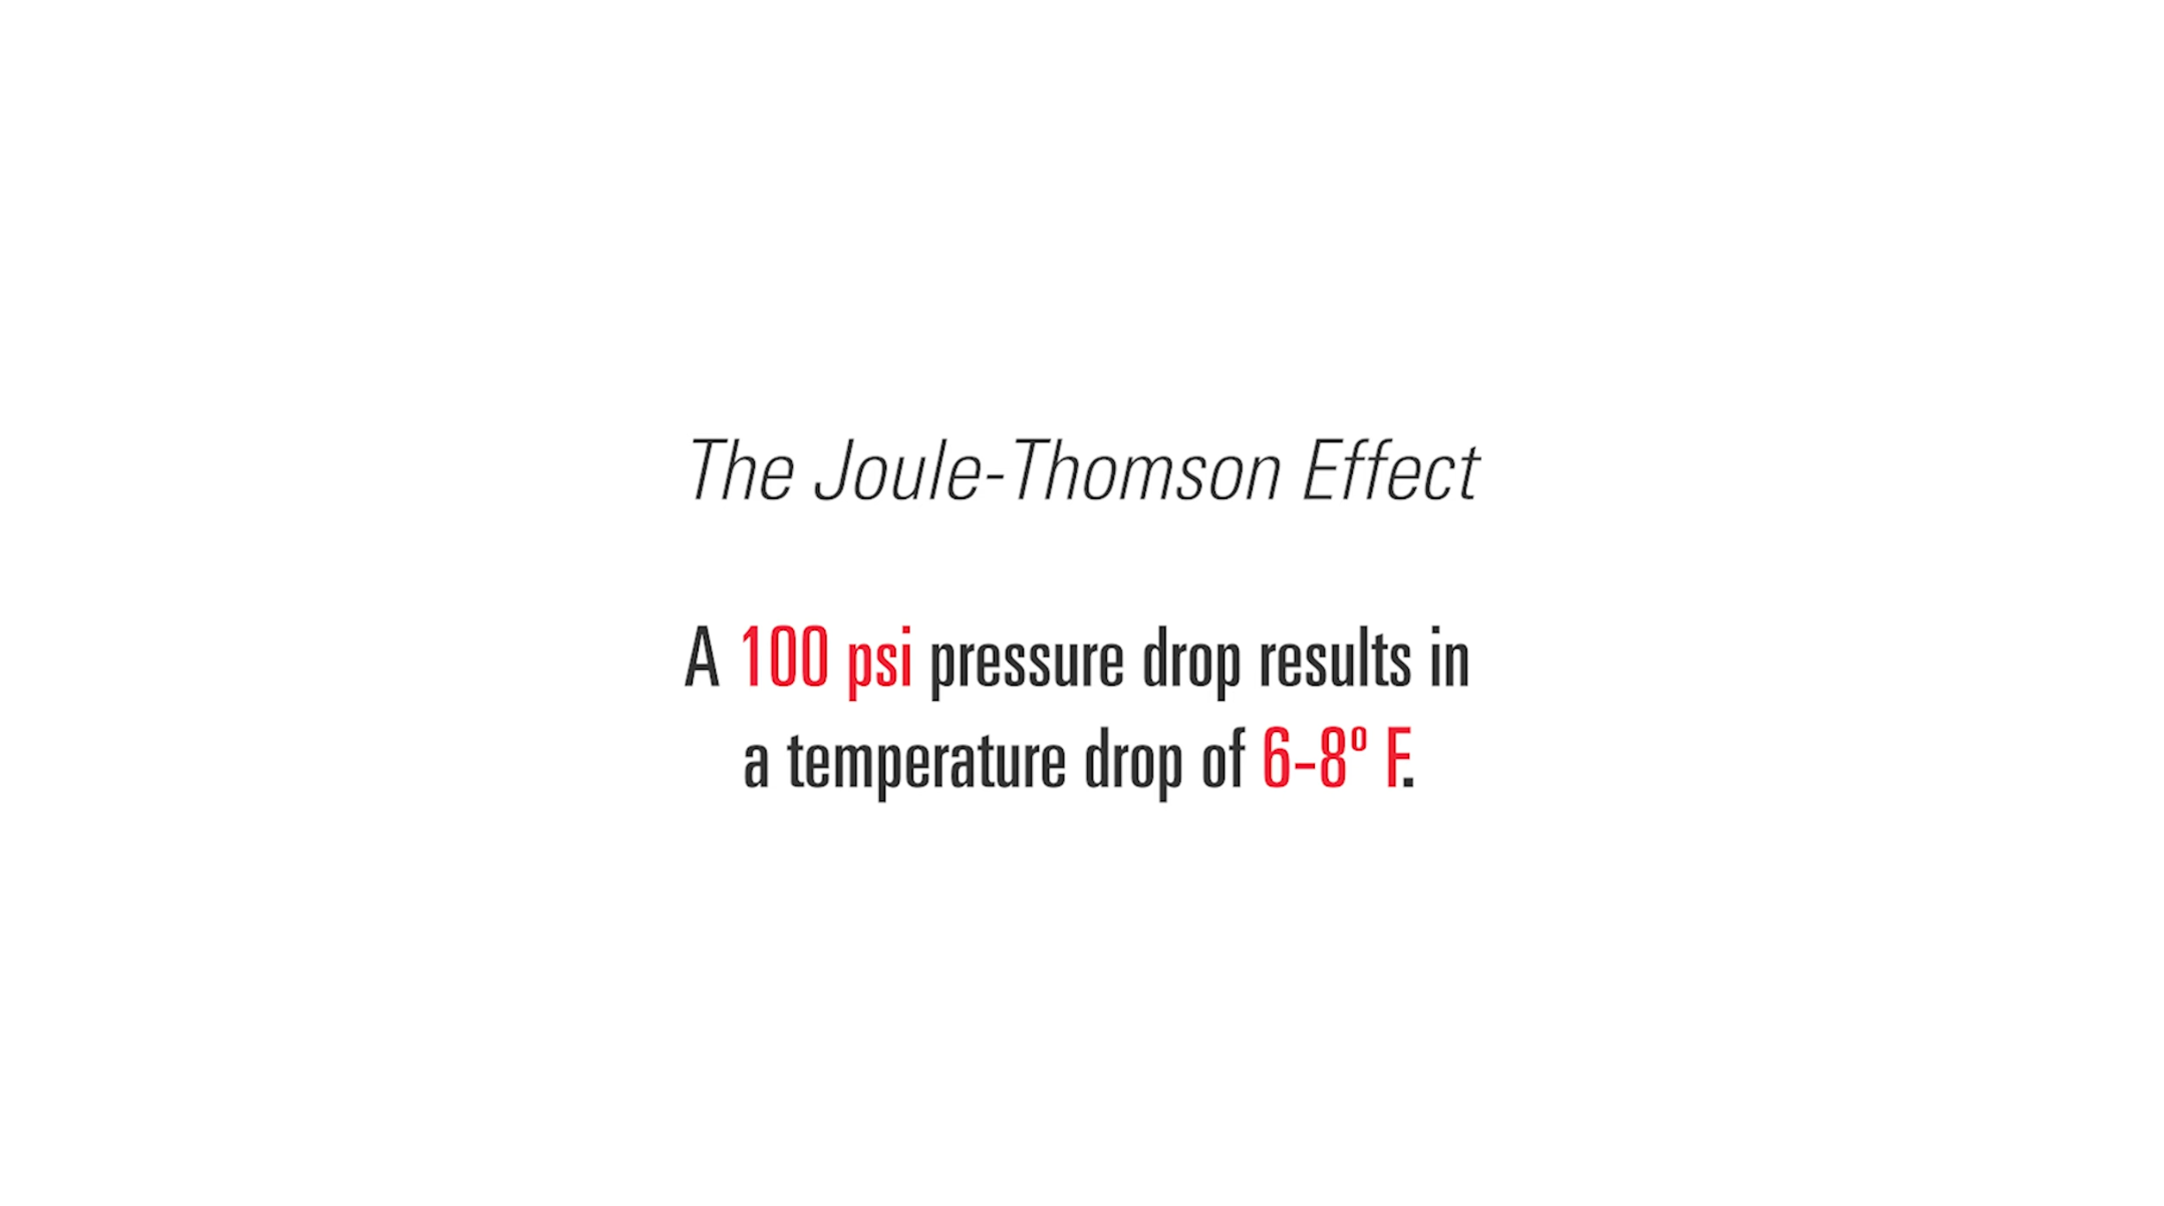 The Joule-Thomson Effect: A 100 psi pressure drop results in a temperature drop of 6-8 degrees Fahrenheit.